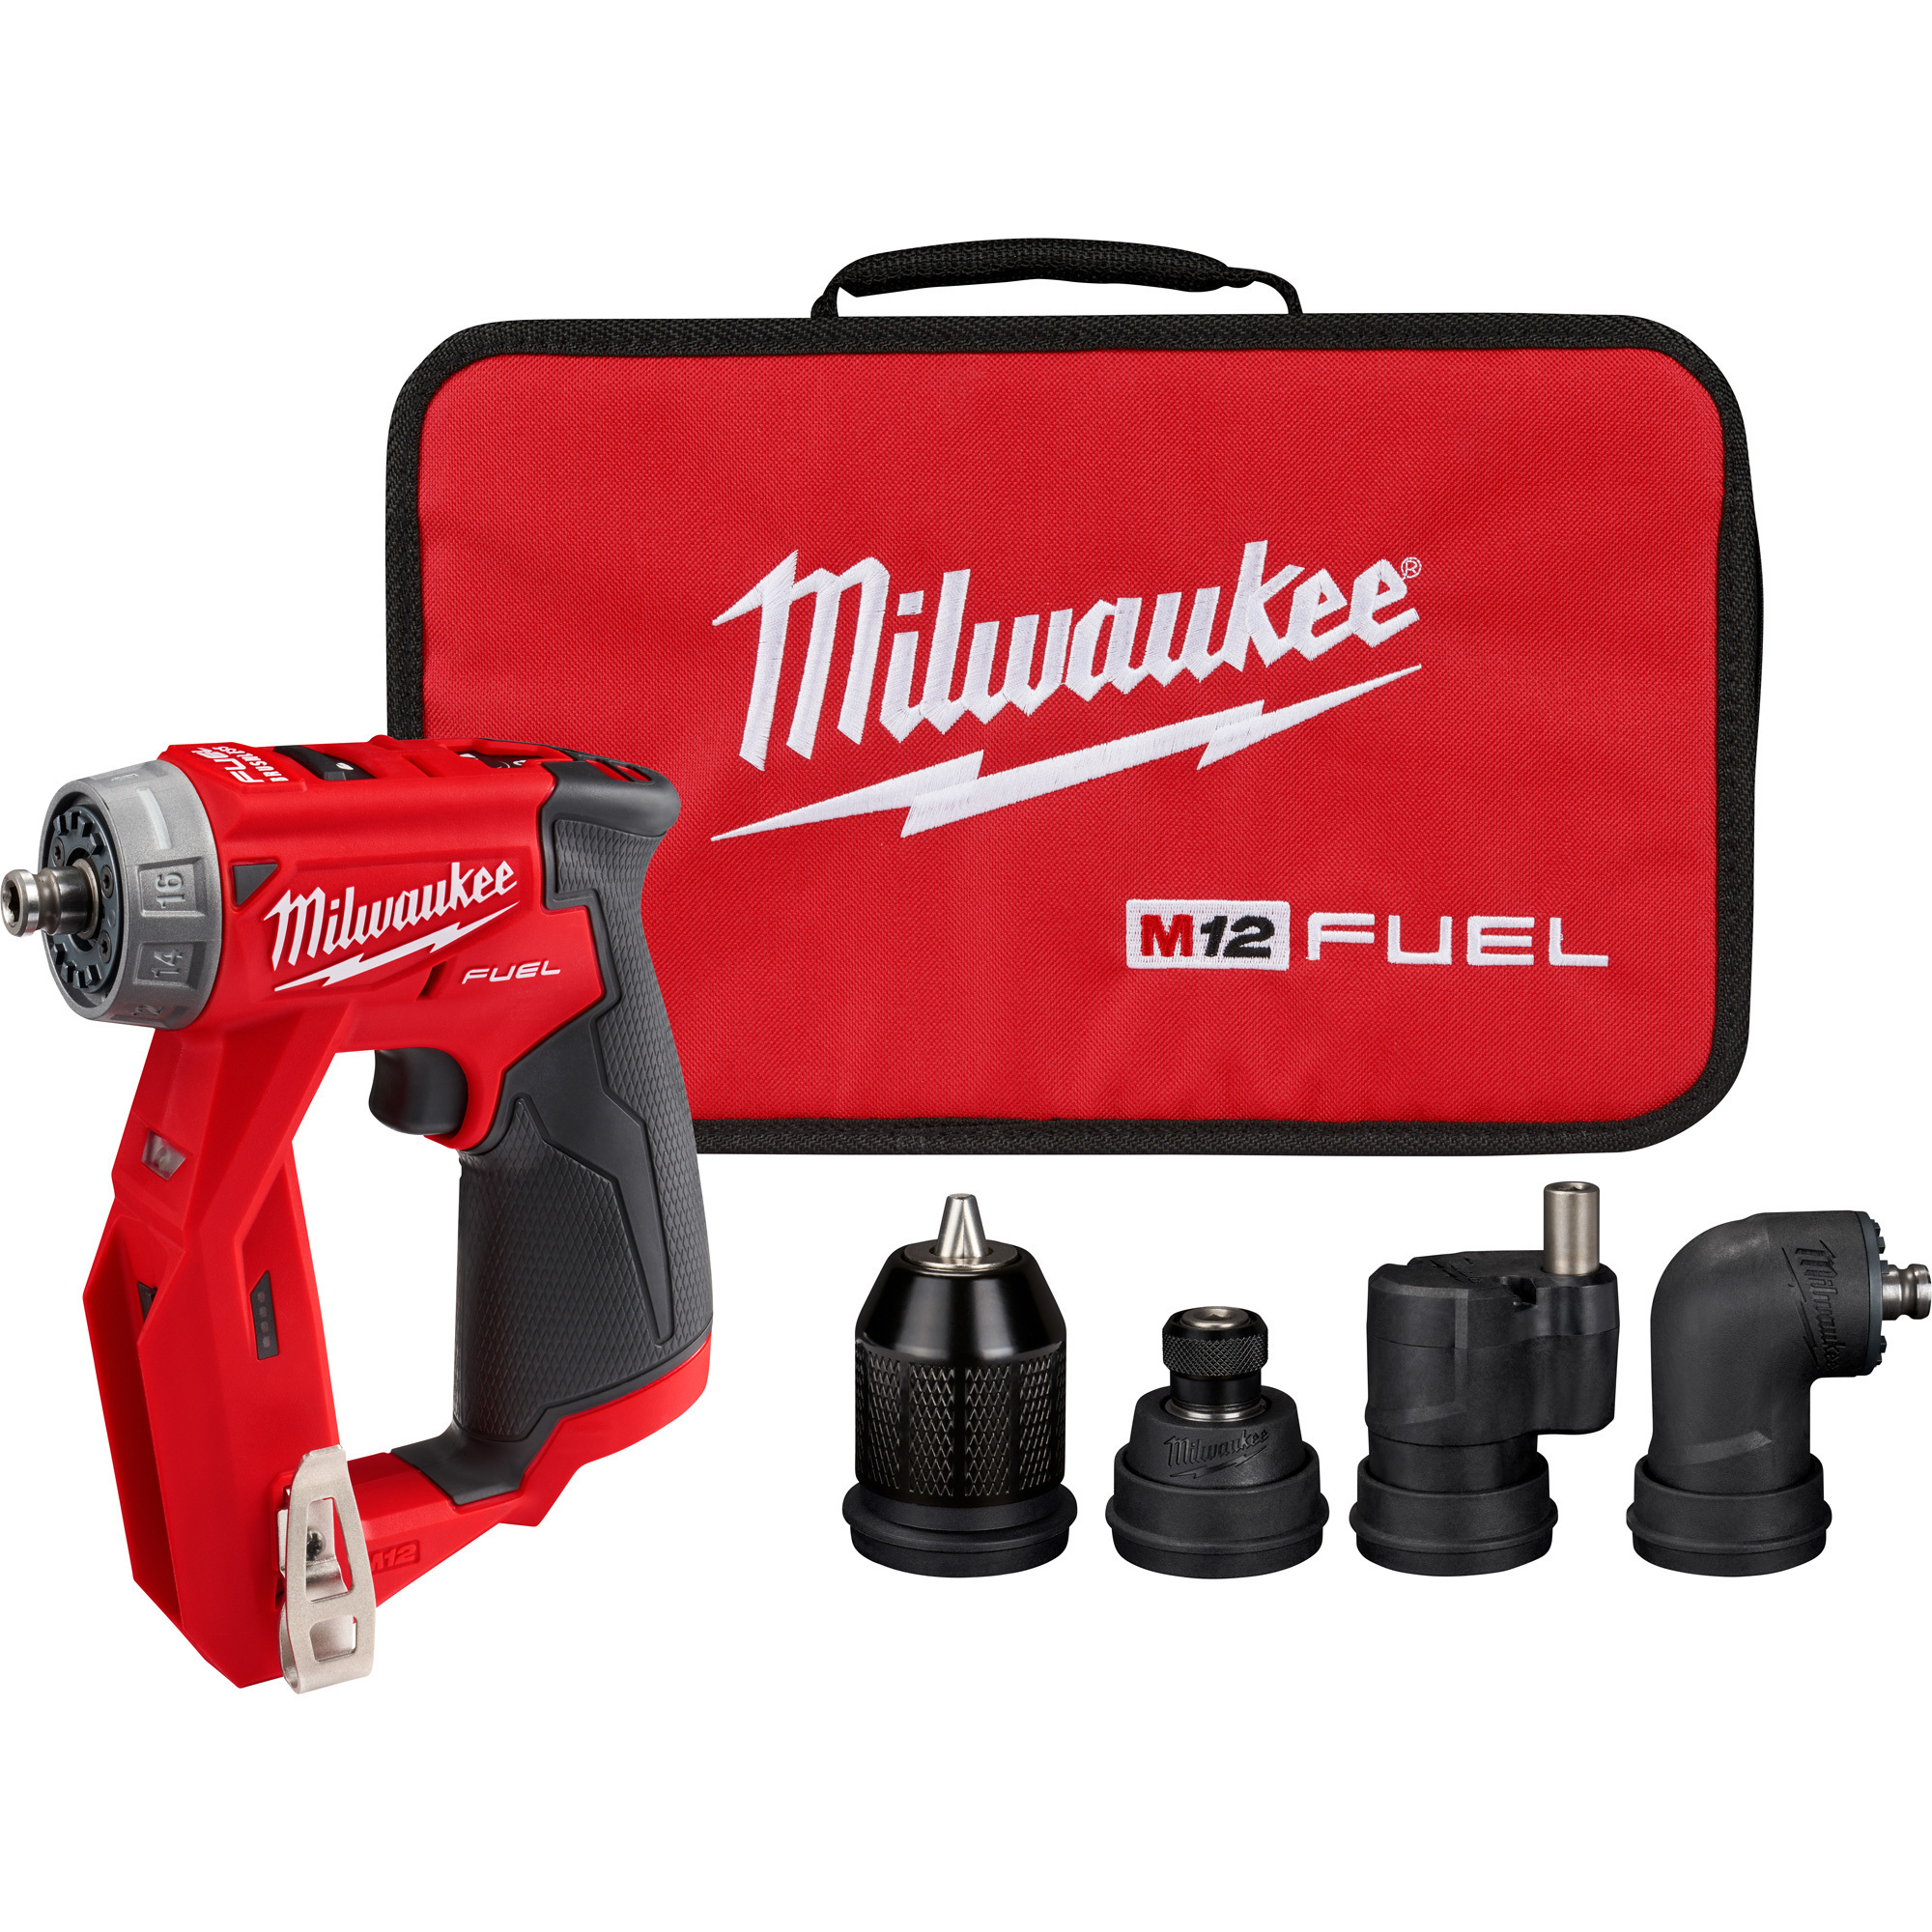 Milwaukee M12 FUEL Installation Drill/Driver, Tool Only, 300 Inch/Lbs. Torque, 1600 RPM, Model 2505-20